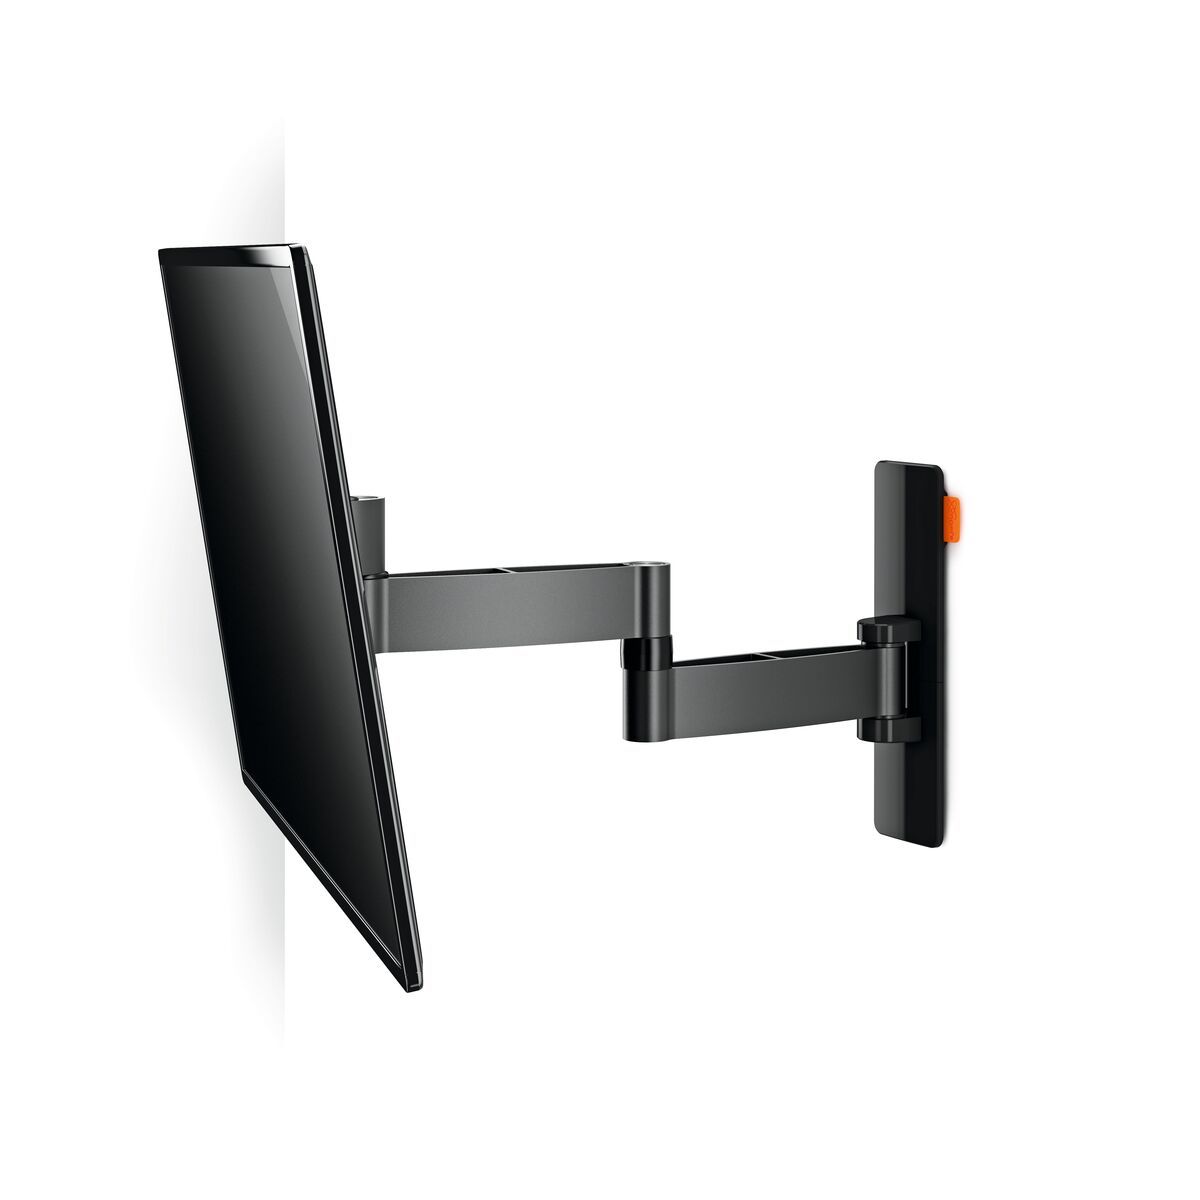 Vogel's W53060 Full-Motion TV Wall Mount (black) - Suitable for 19 up to 43 inch TVs - Full motion (up to 180°) - Tilt -10°/+10° - White wall